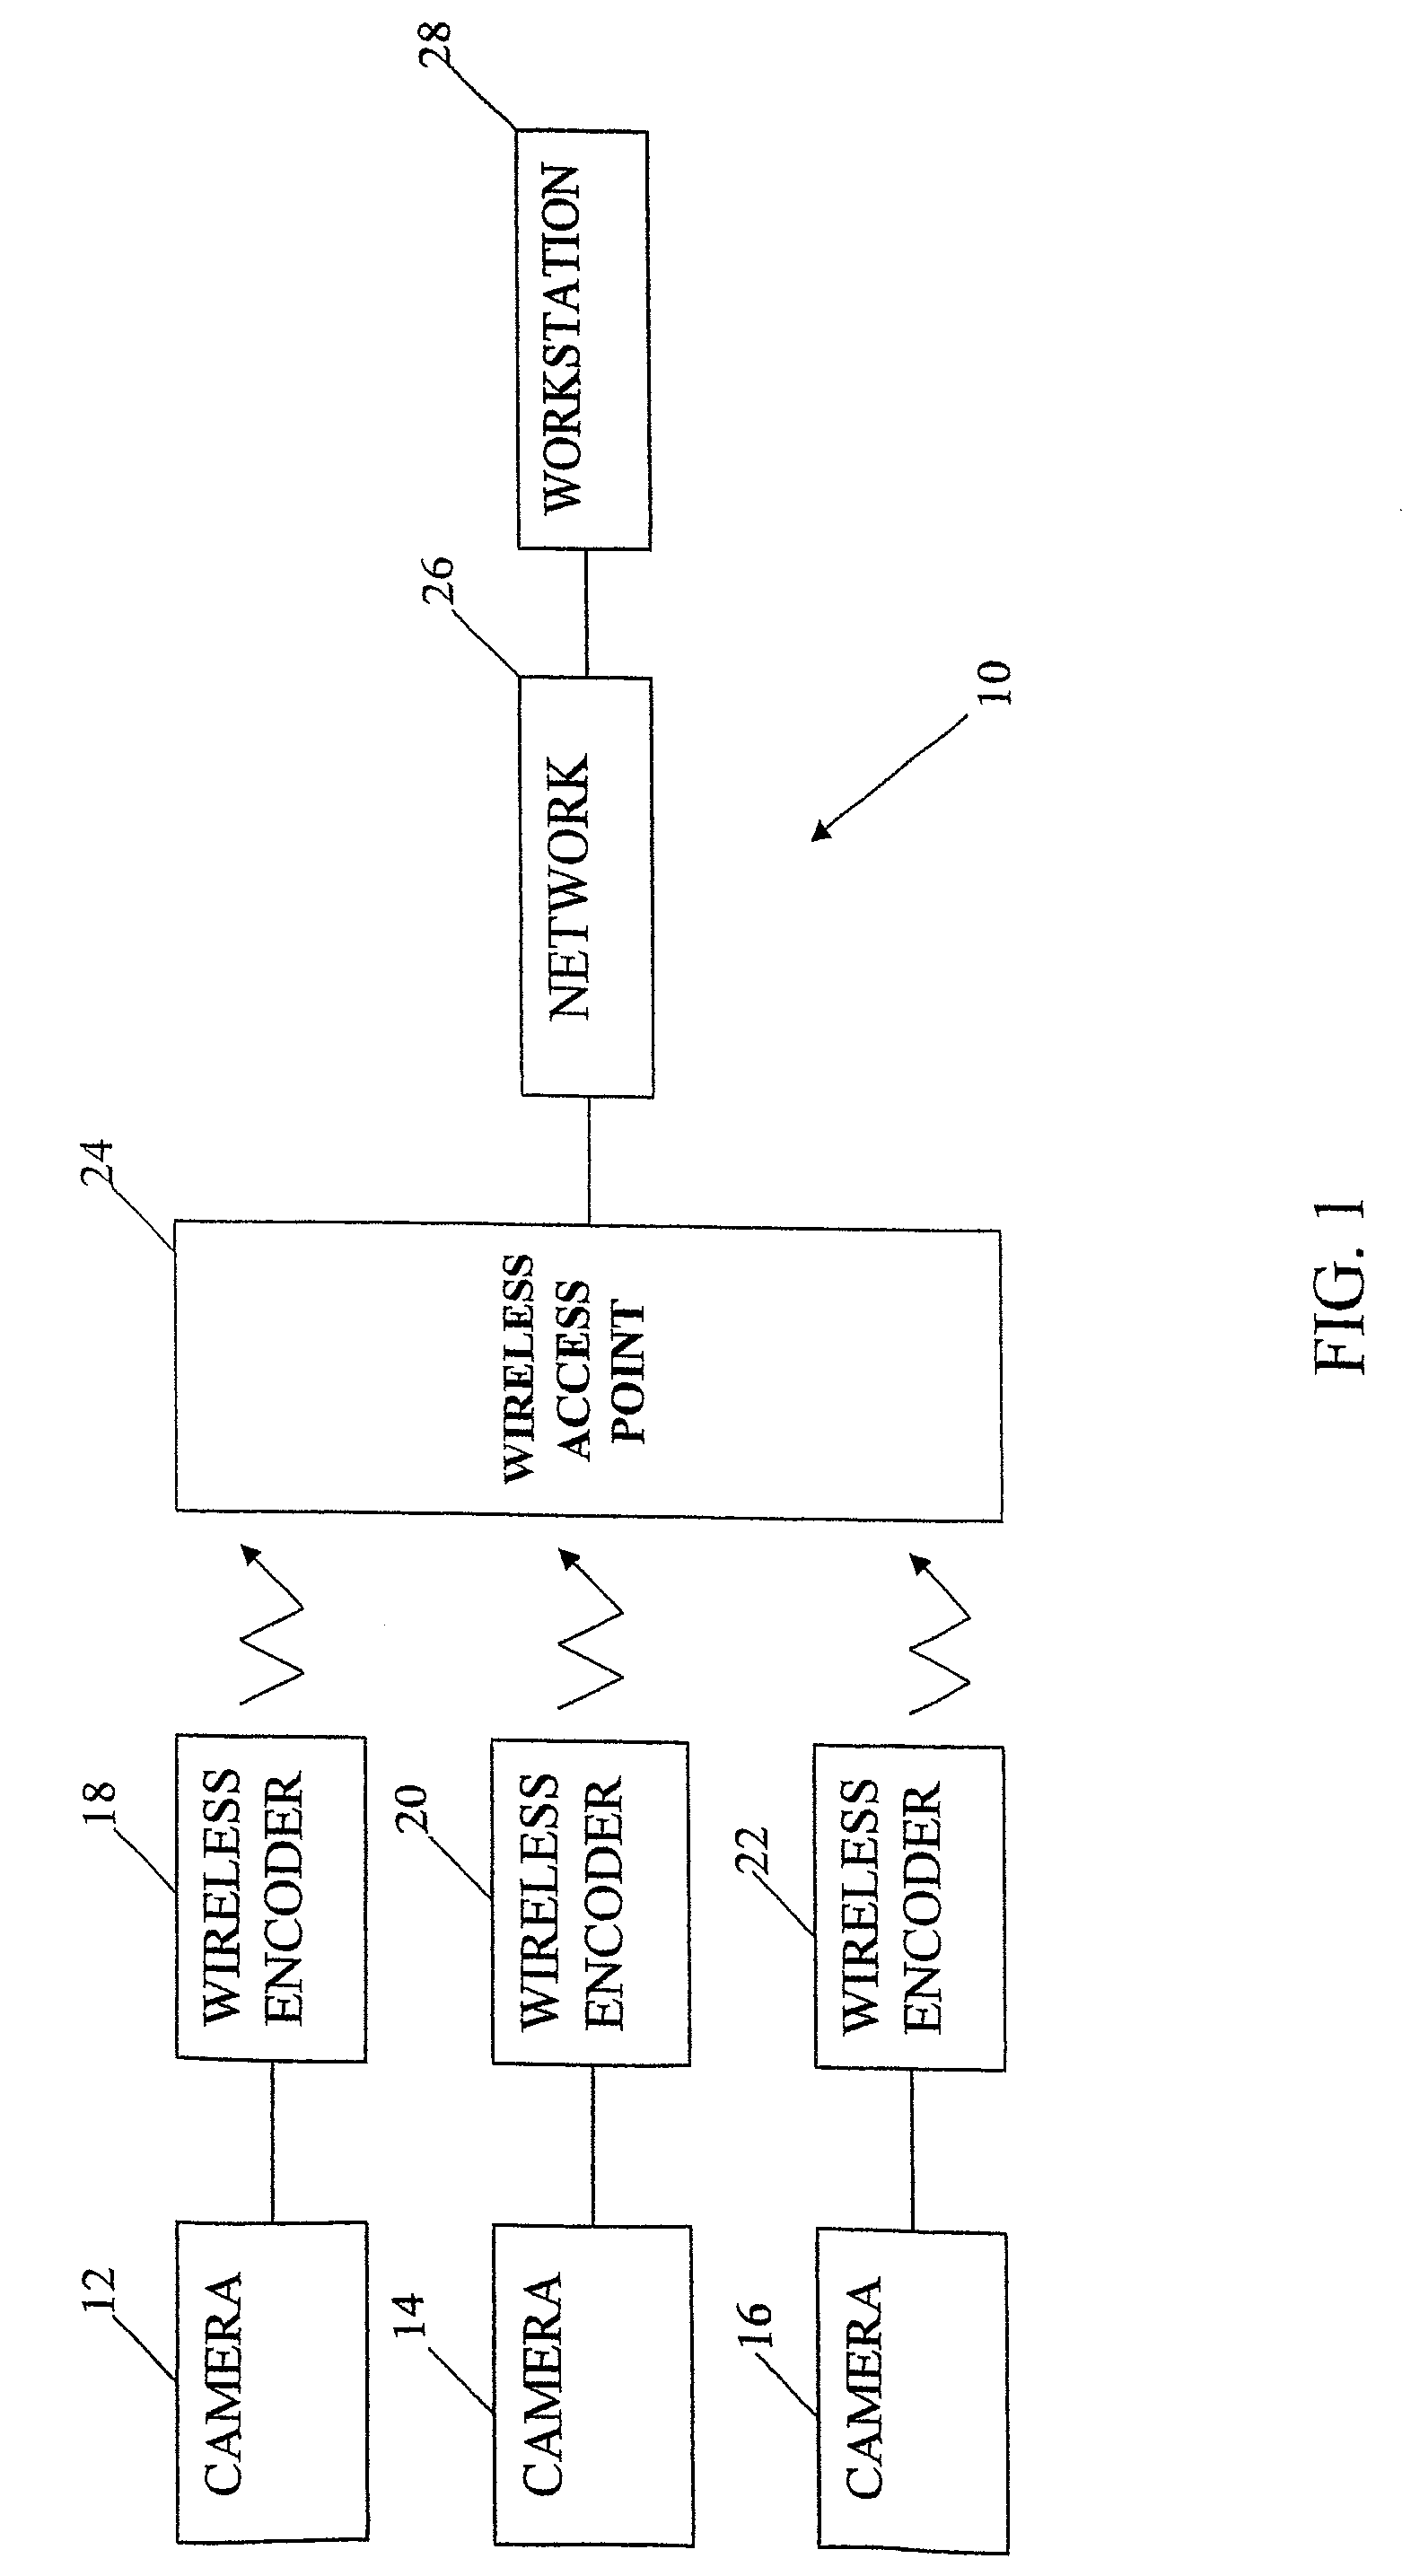 Method and apparatus for improving video performance in a wireless surveillance system